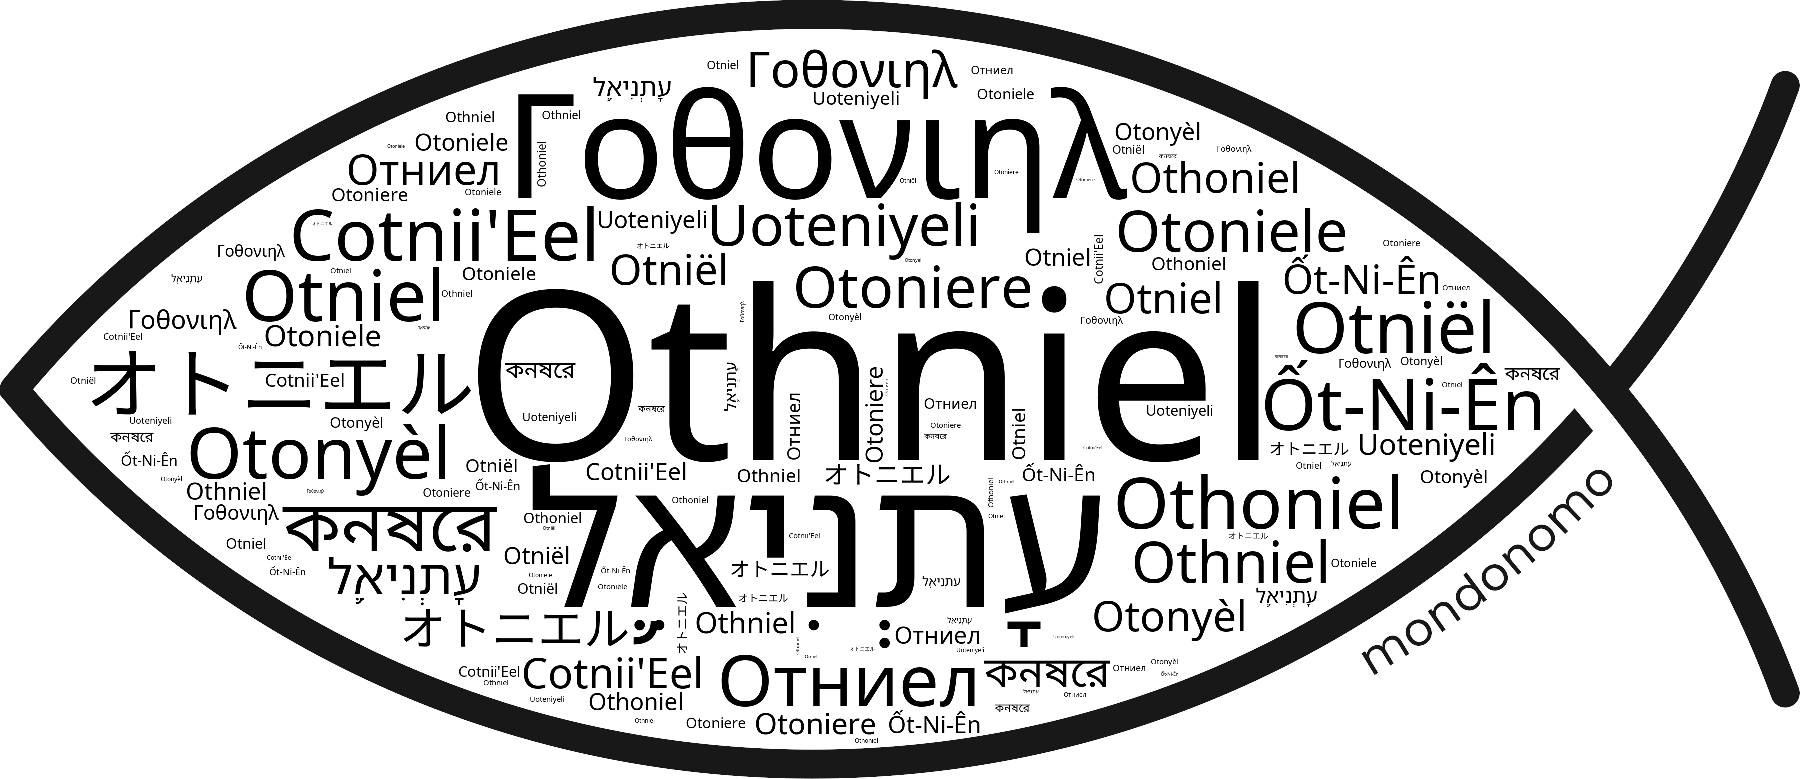 Name Othniel in the world's Bibles